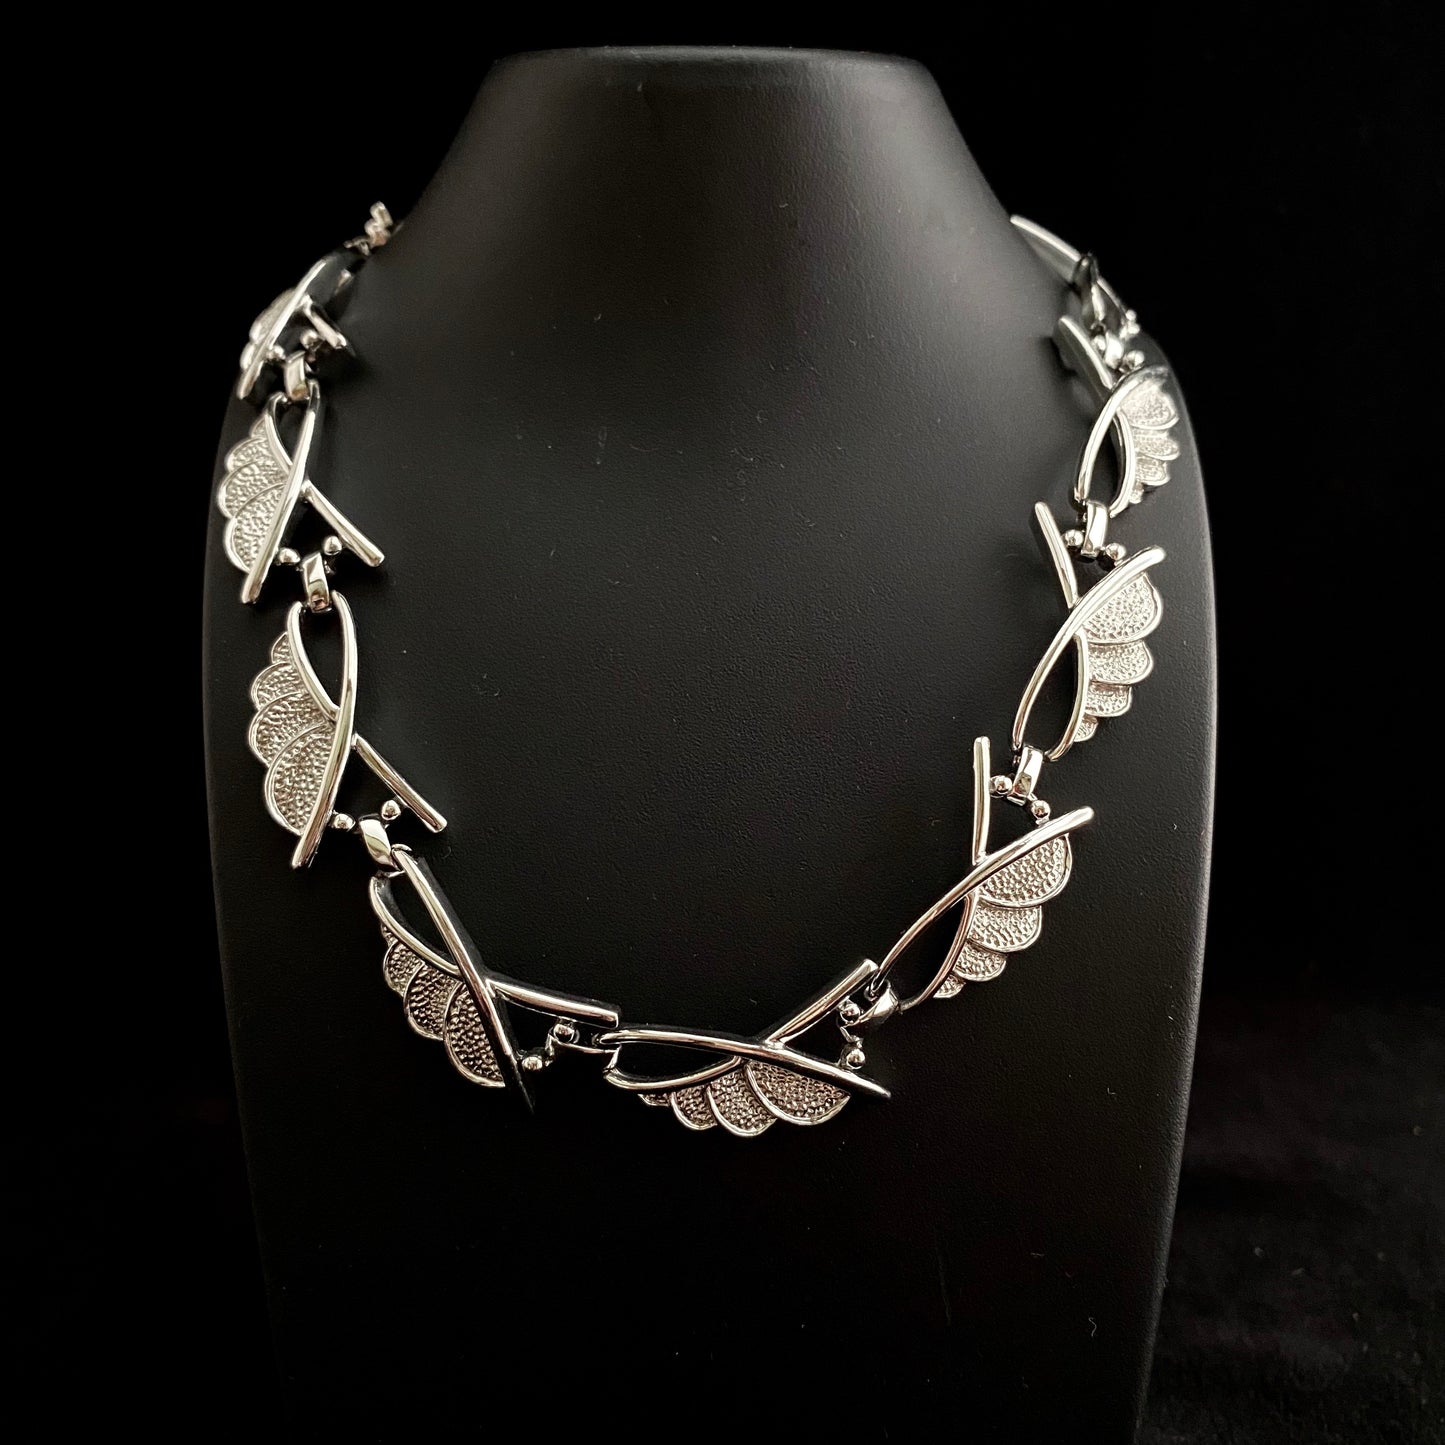 1957 Sarah Coventry Chic Collection Necklace & Earrings